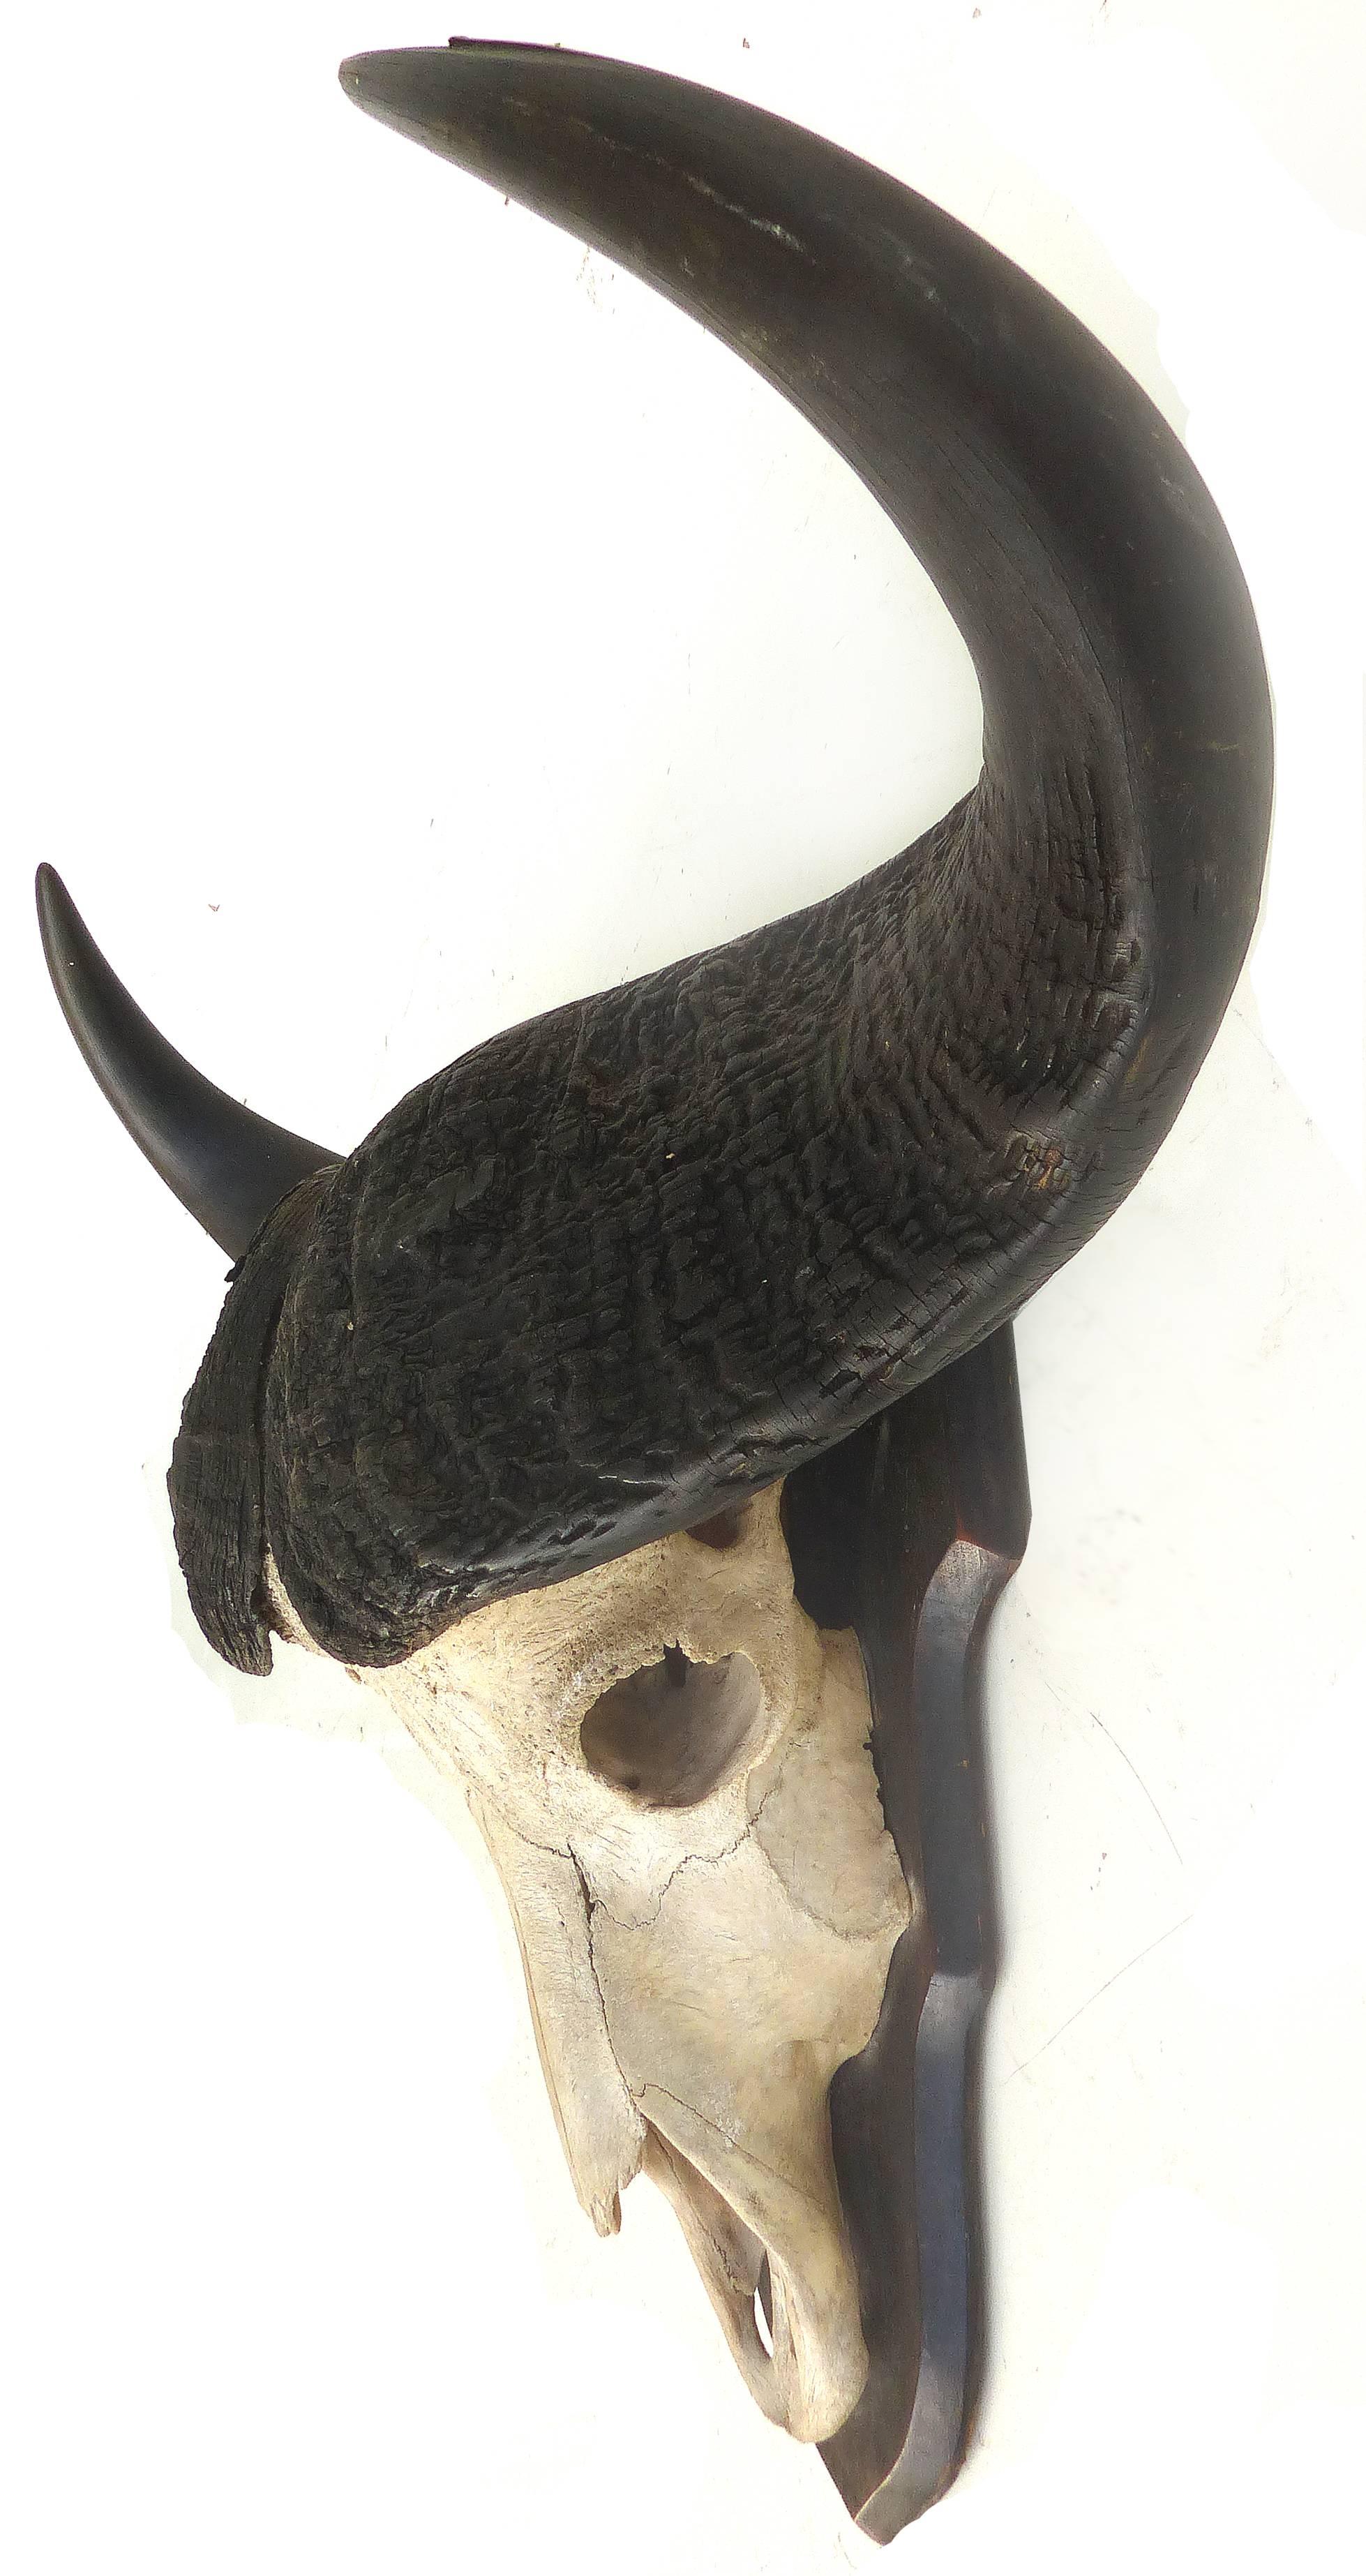 Offered for sale is a water buffalo skull with horns mounted on a wooden plaque. The mount has rich textures and is presented nicely.